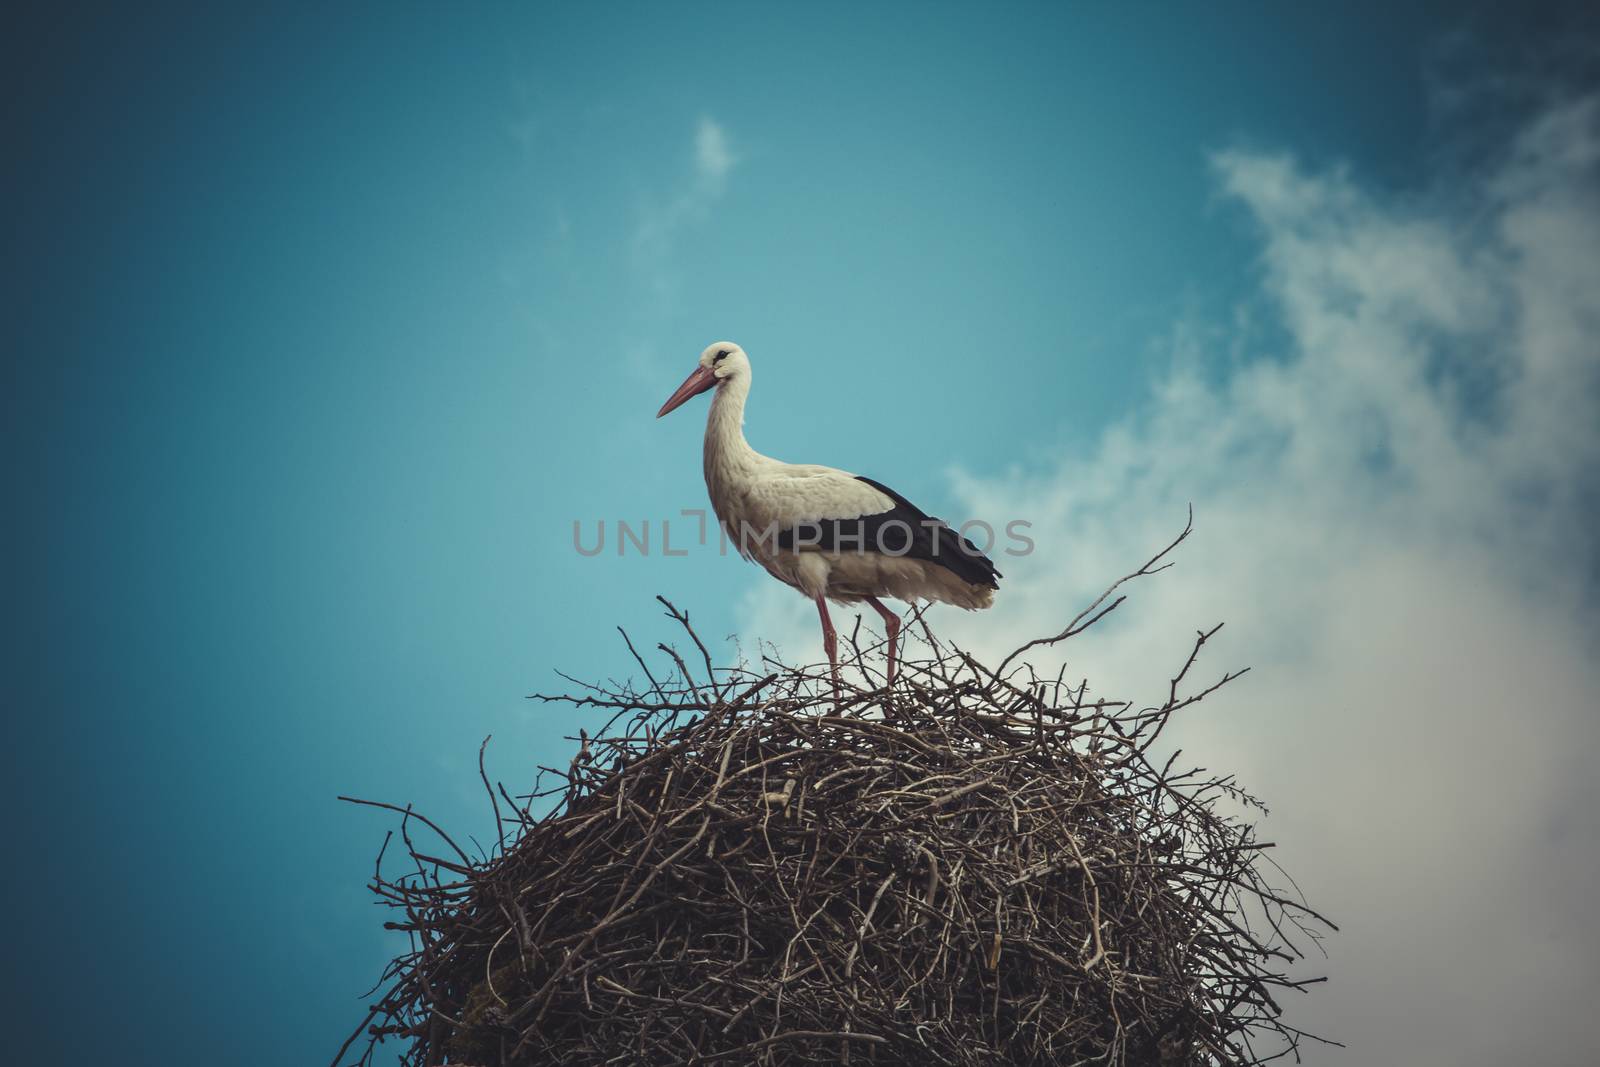 village, Stork nest made ������of tree branches over blue sky in by FernandoCortes